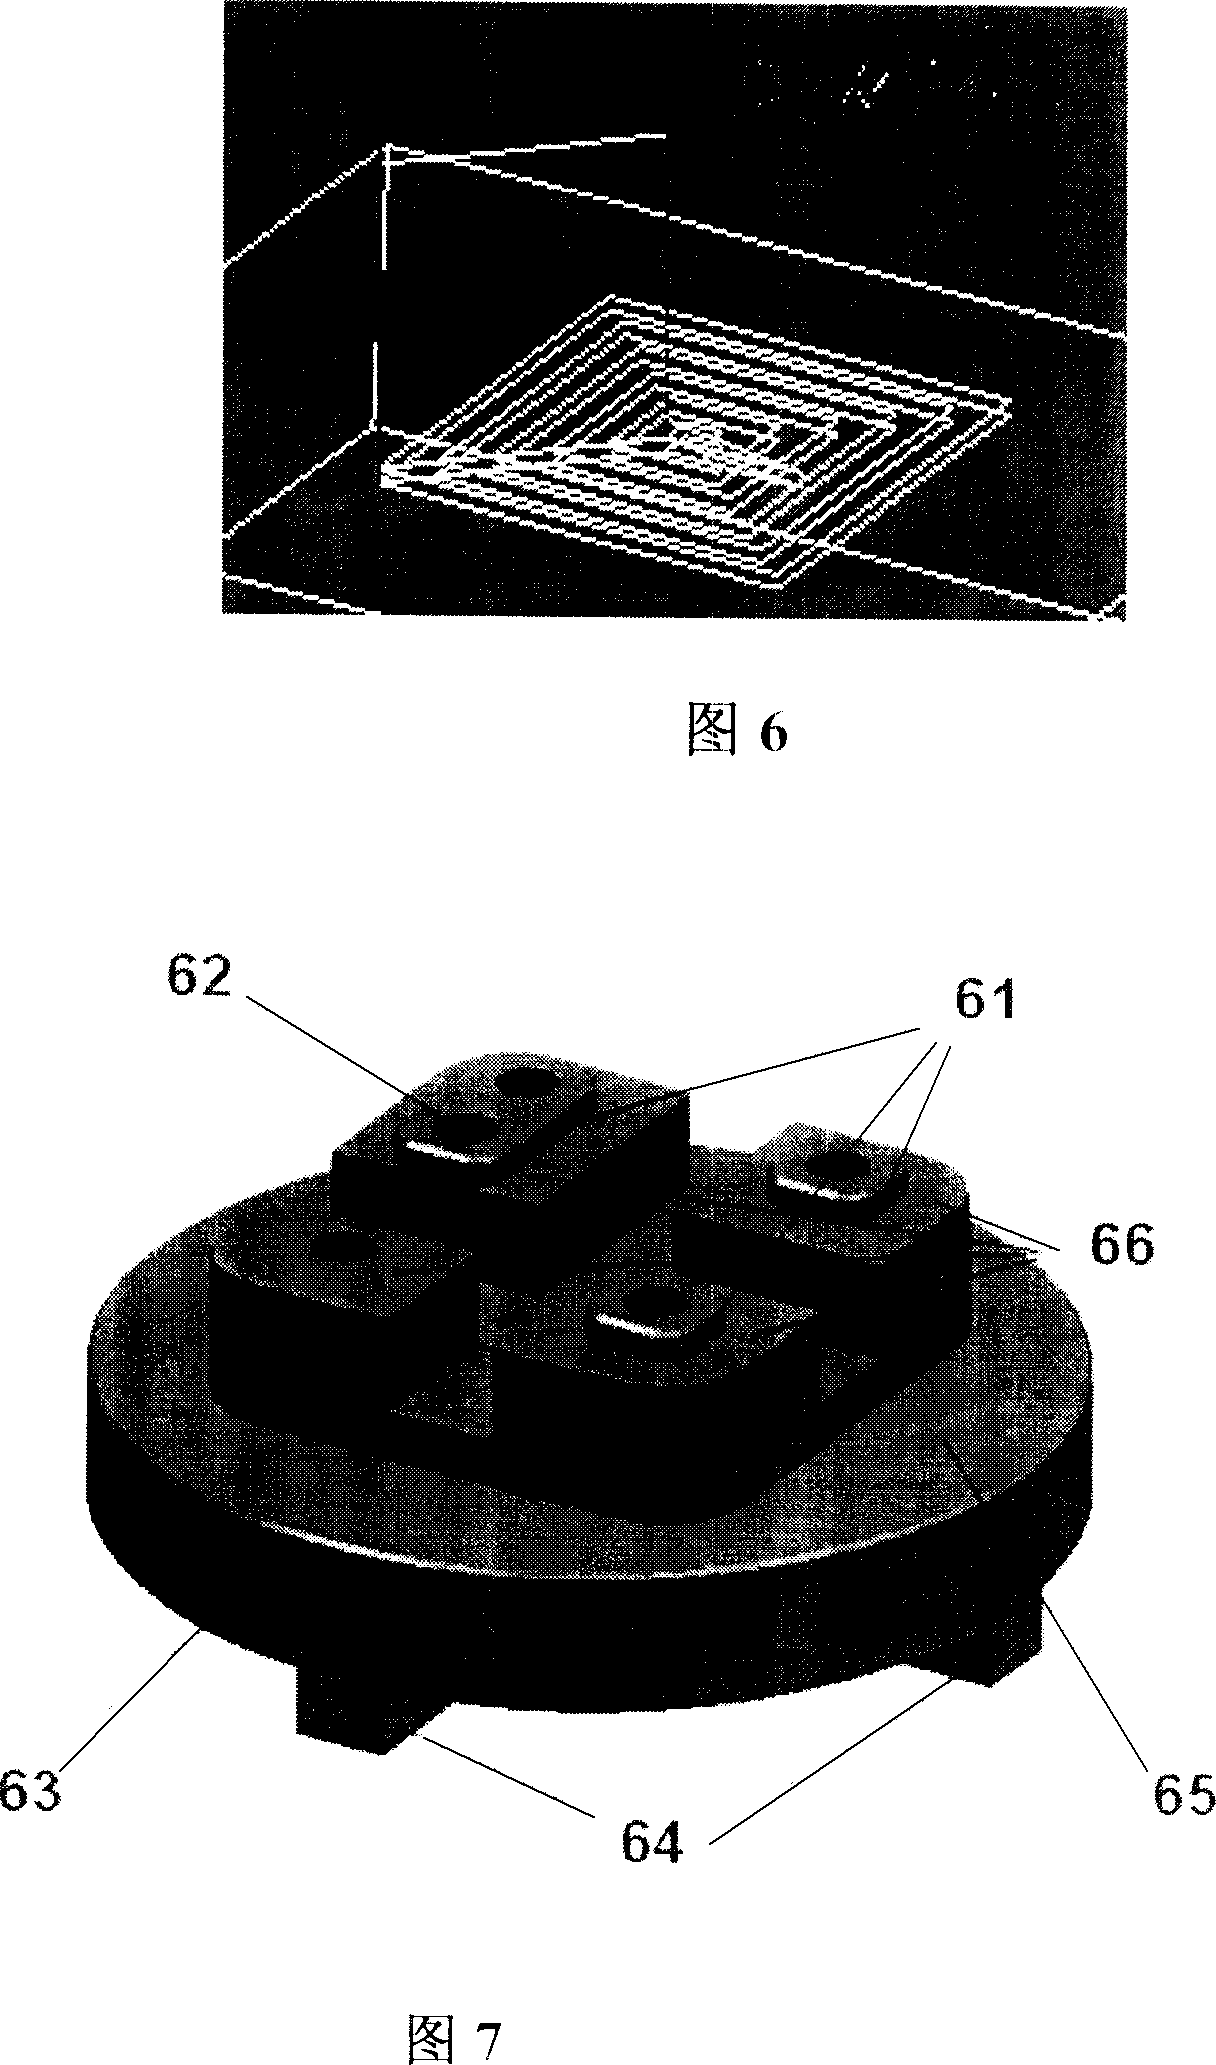 Equal-high segmenting combined numerical controlling milling manufacture method of complex shaped parts